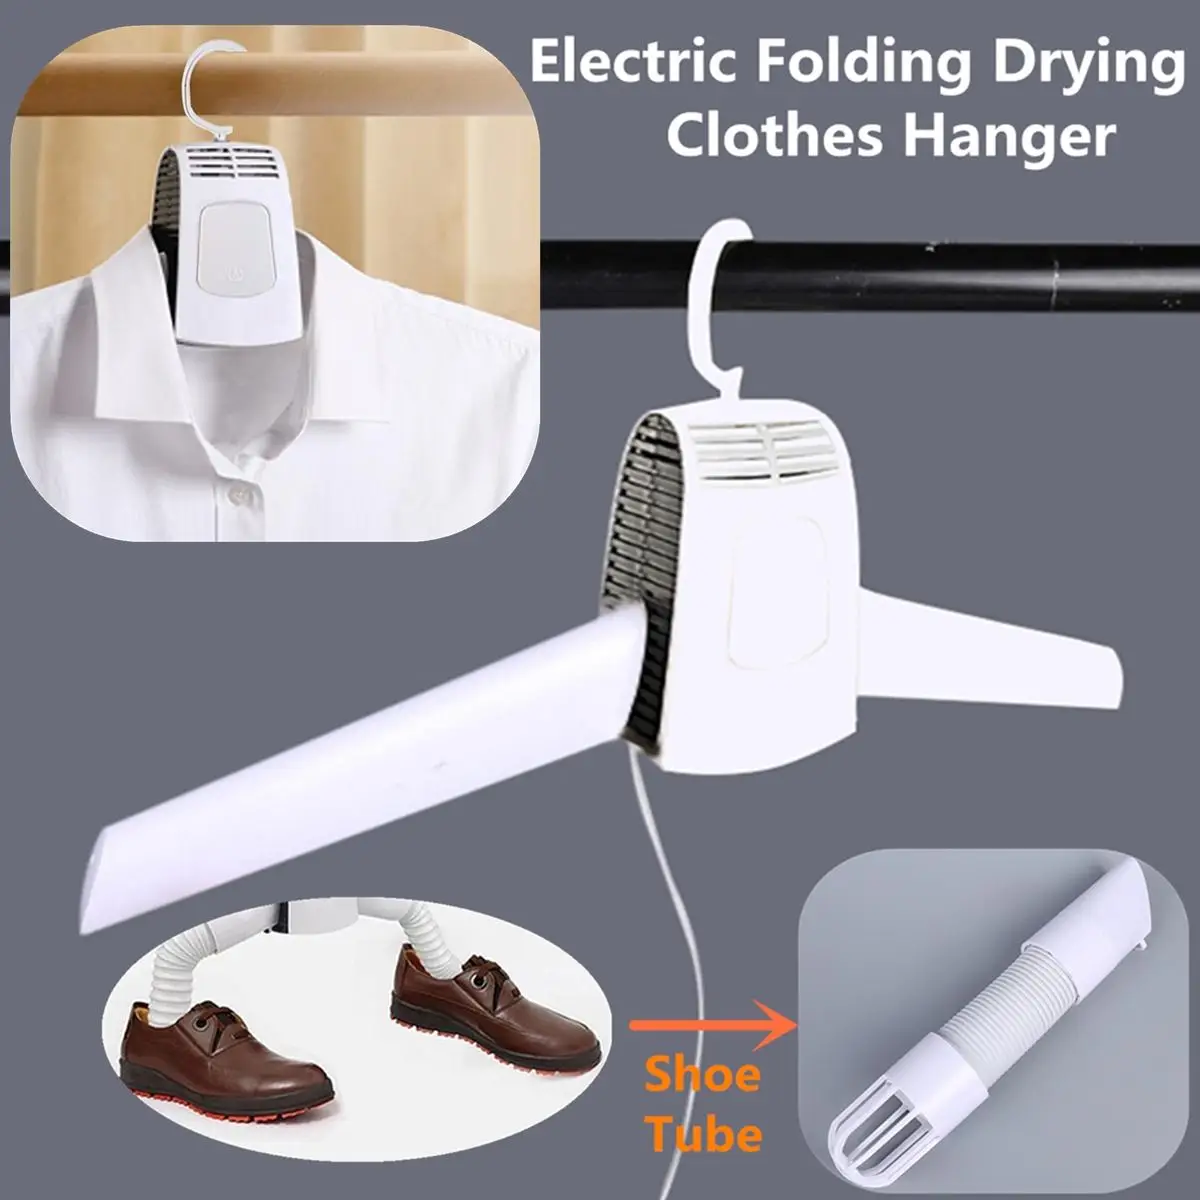 Portable Electric Clothes Drying Rack Folding Dryer Hanger for Travel Laundry Shoes Syfinee Clothes Dryer Shoe Dryer Hanger Dryer 